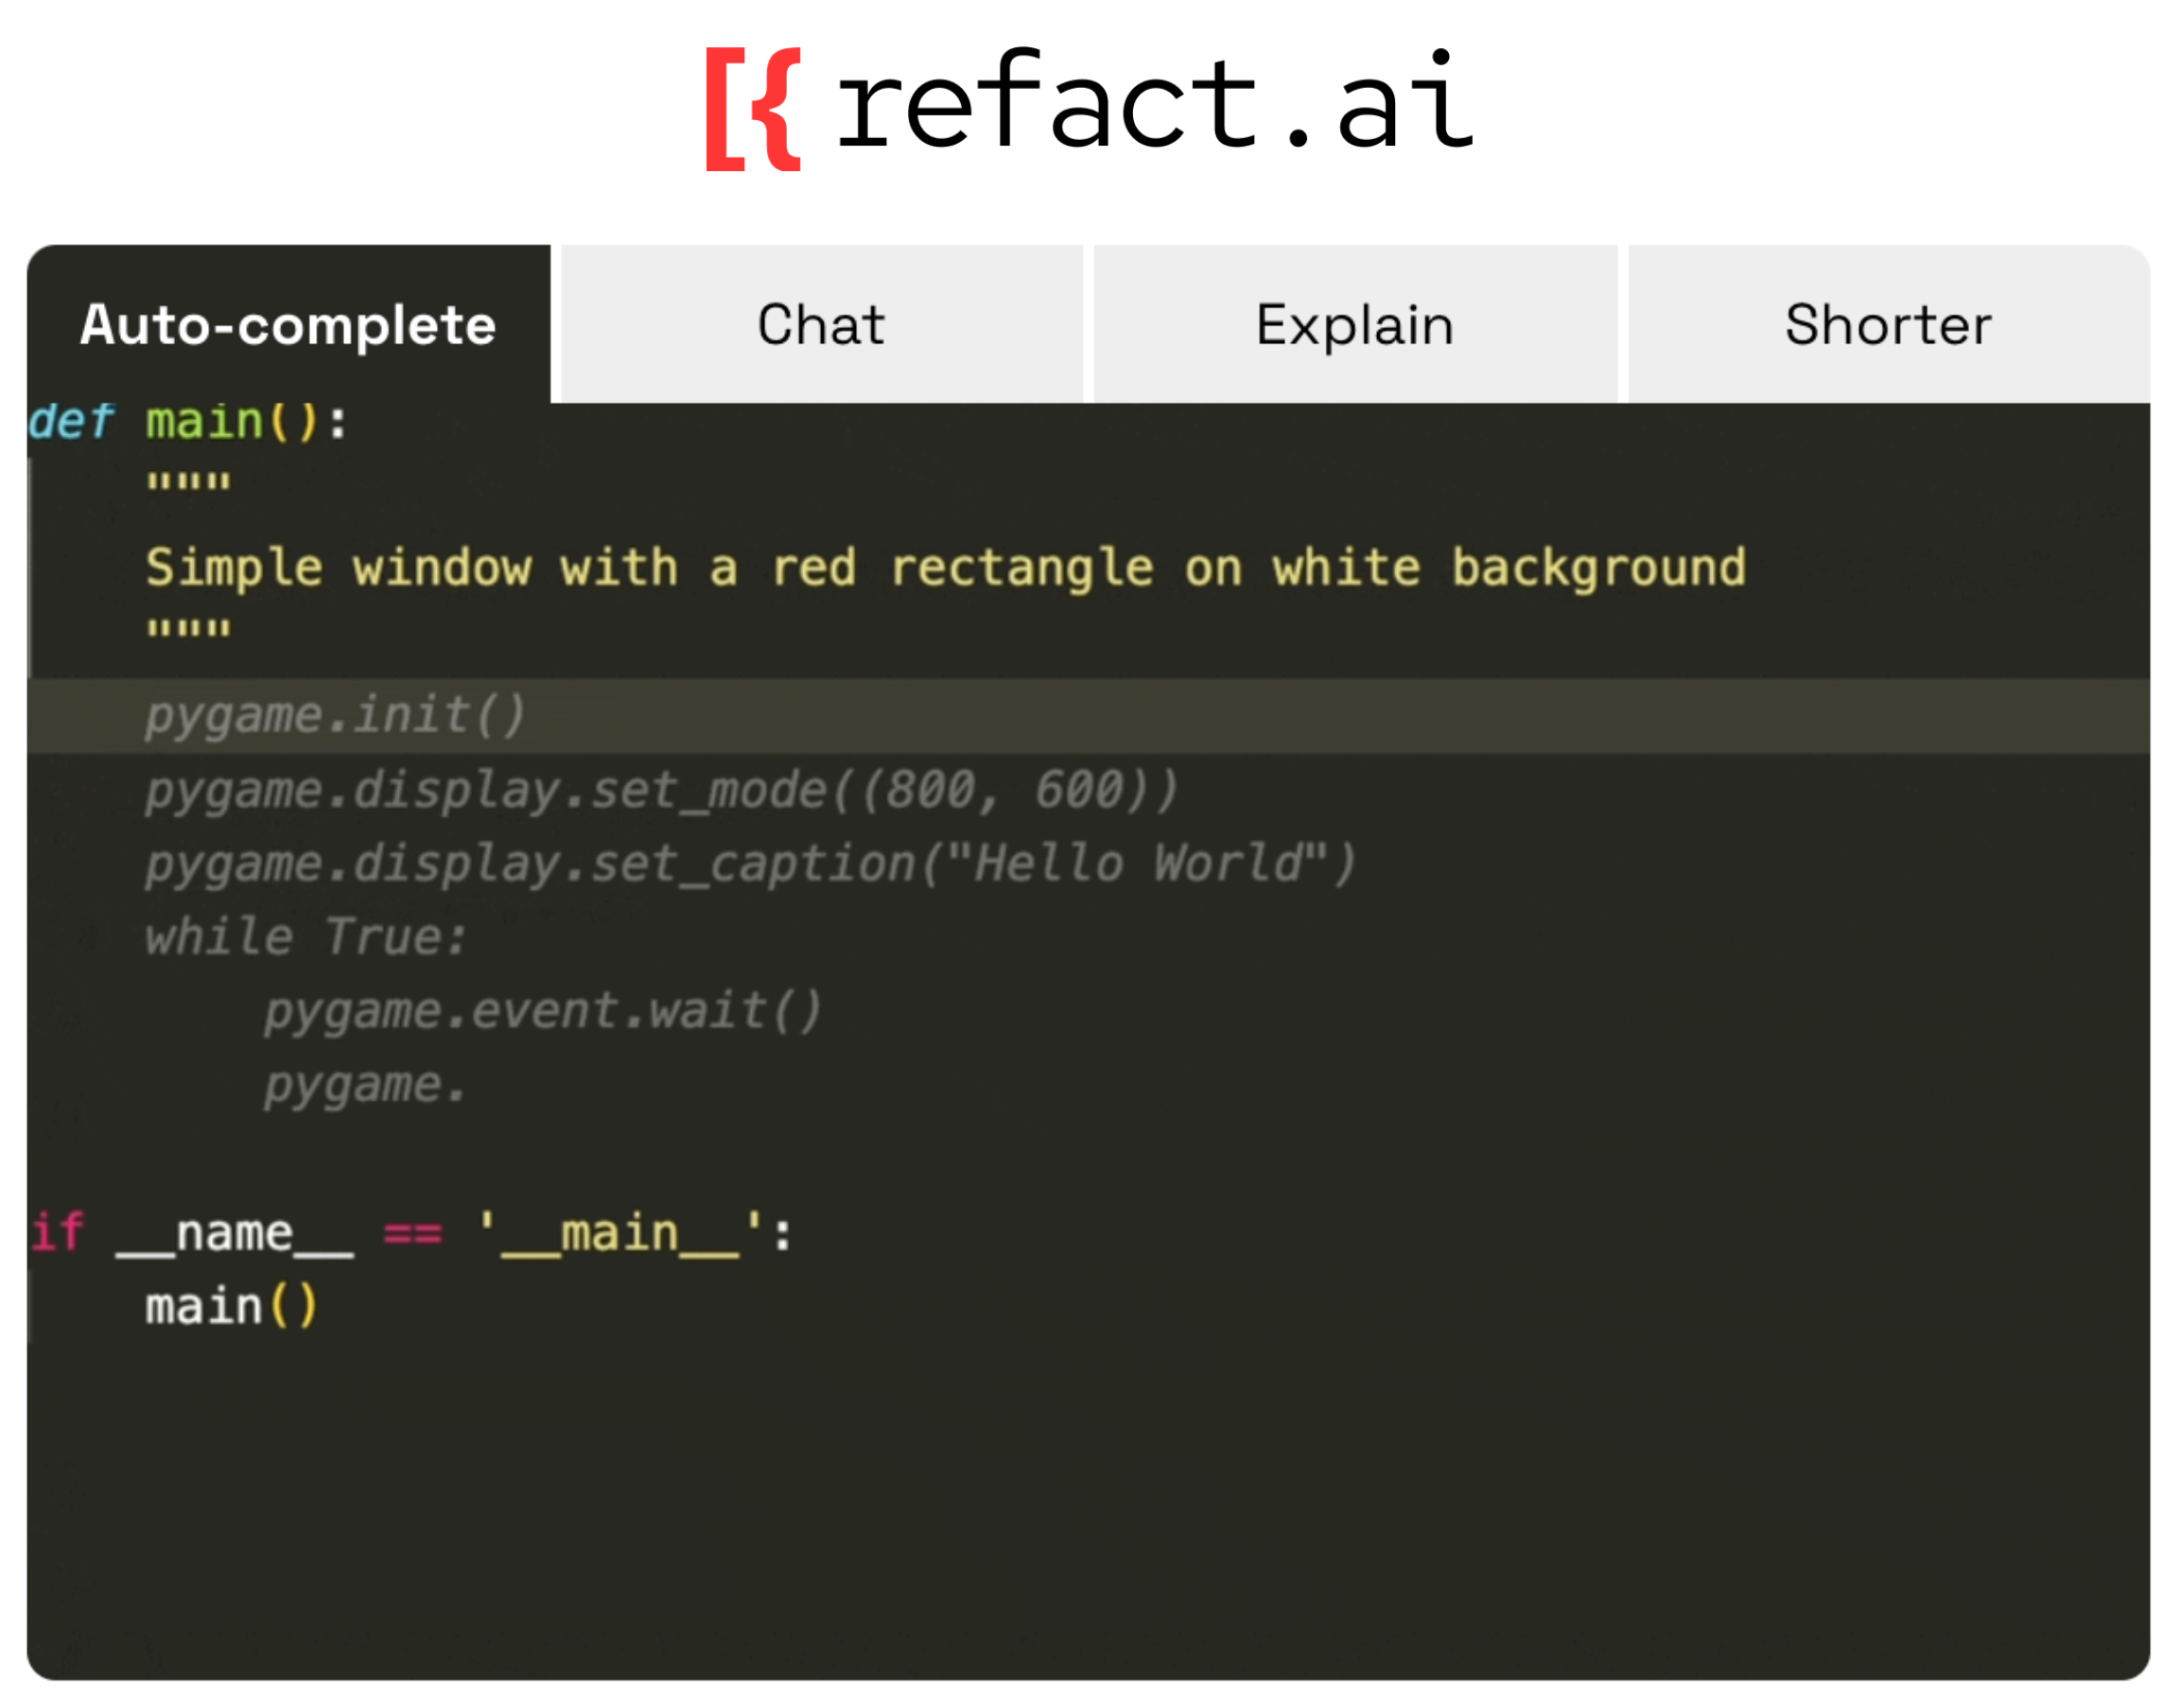 Refact offers code completion, refactoring, context-aware chat, and an AI Toolbox which helps explain, refactor your code, write documentation, find bugs, you can also ask in natural language to generate new code for you.